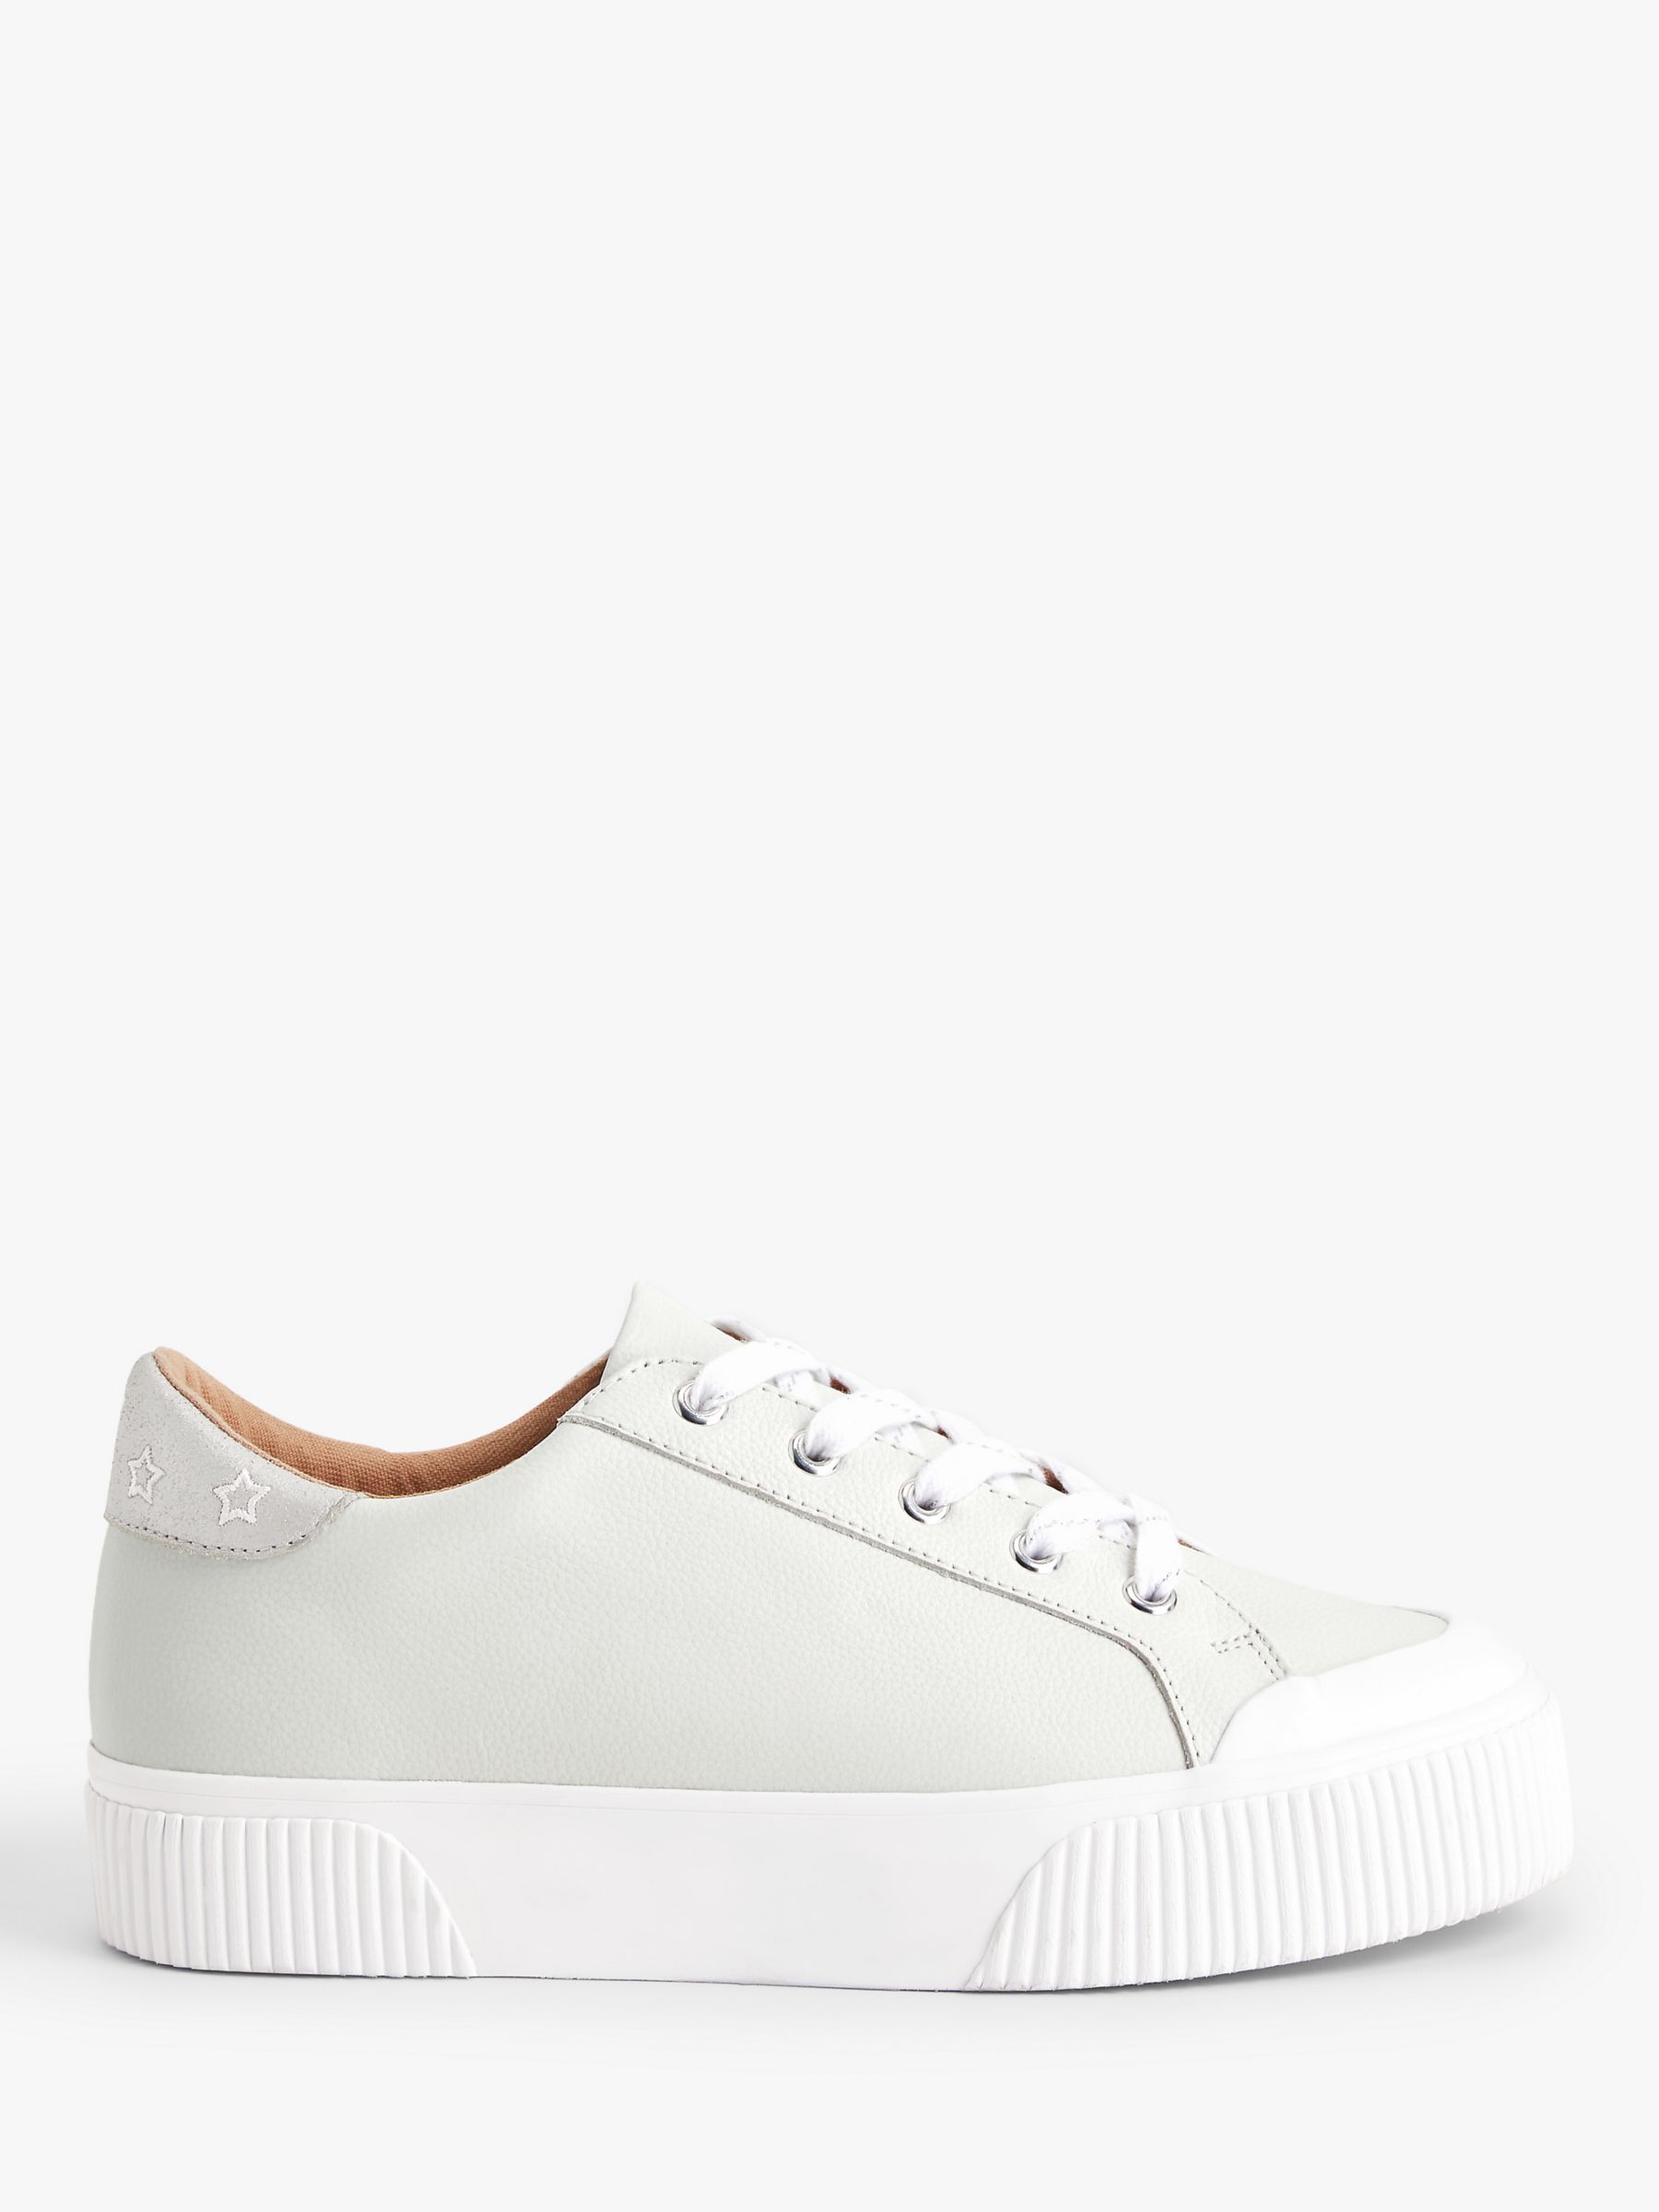 AND/OR Eloise Leather Flatform Trainers, White